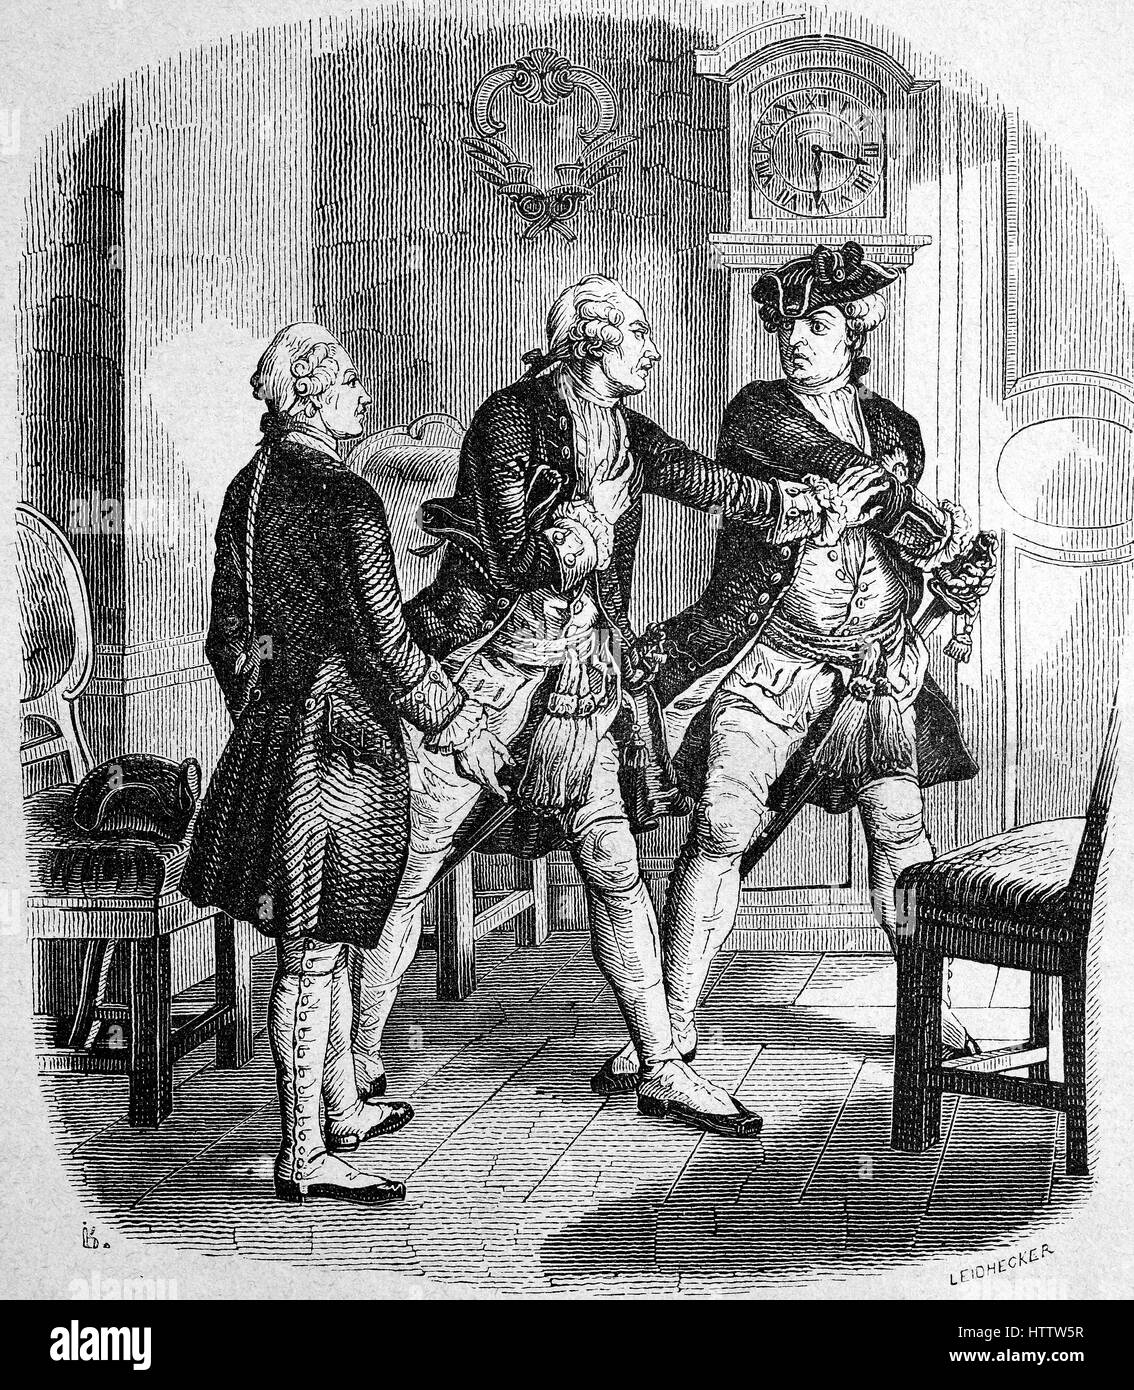 Frederick Wilhelm I. of Prussia threatens his son Friedrich after his failed attempt to escape, Germany. Frederick William I, Friedrich Wilhelm I, 14 August 1688 - 31 May 1740, known as the Soldier King, was the King in Prussia and Elector of Brandenburg from 1713 until his death, reproduction of a woodcut from 1882, digital improved Stock Photo